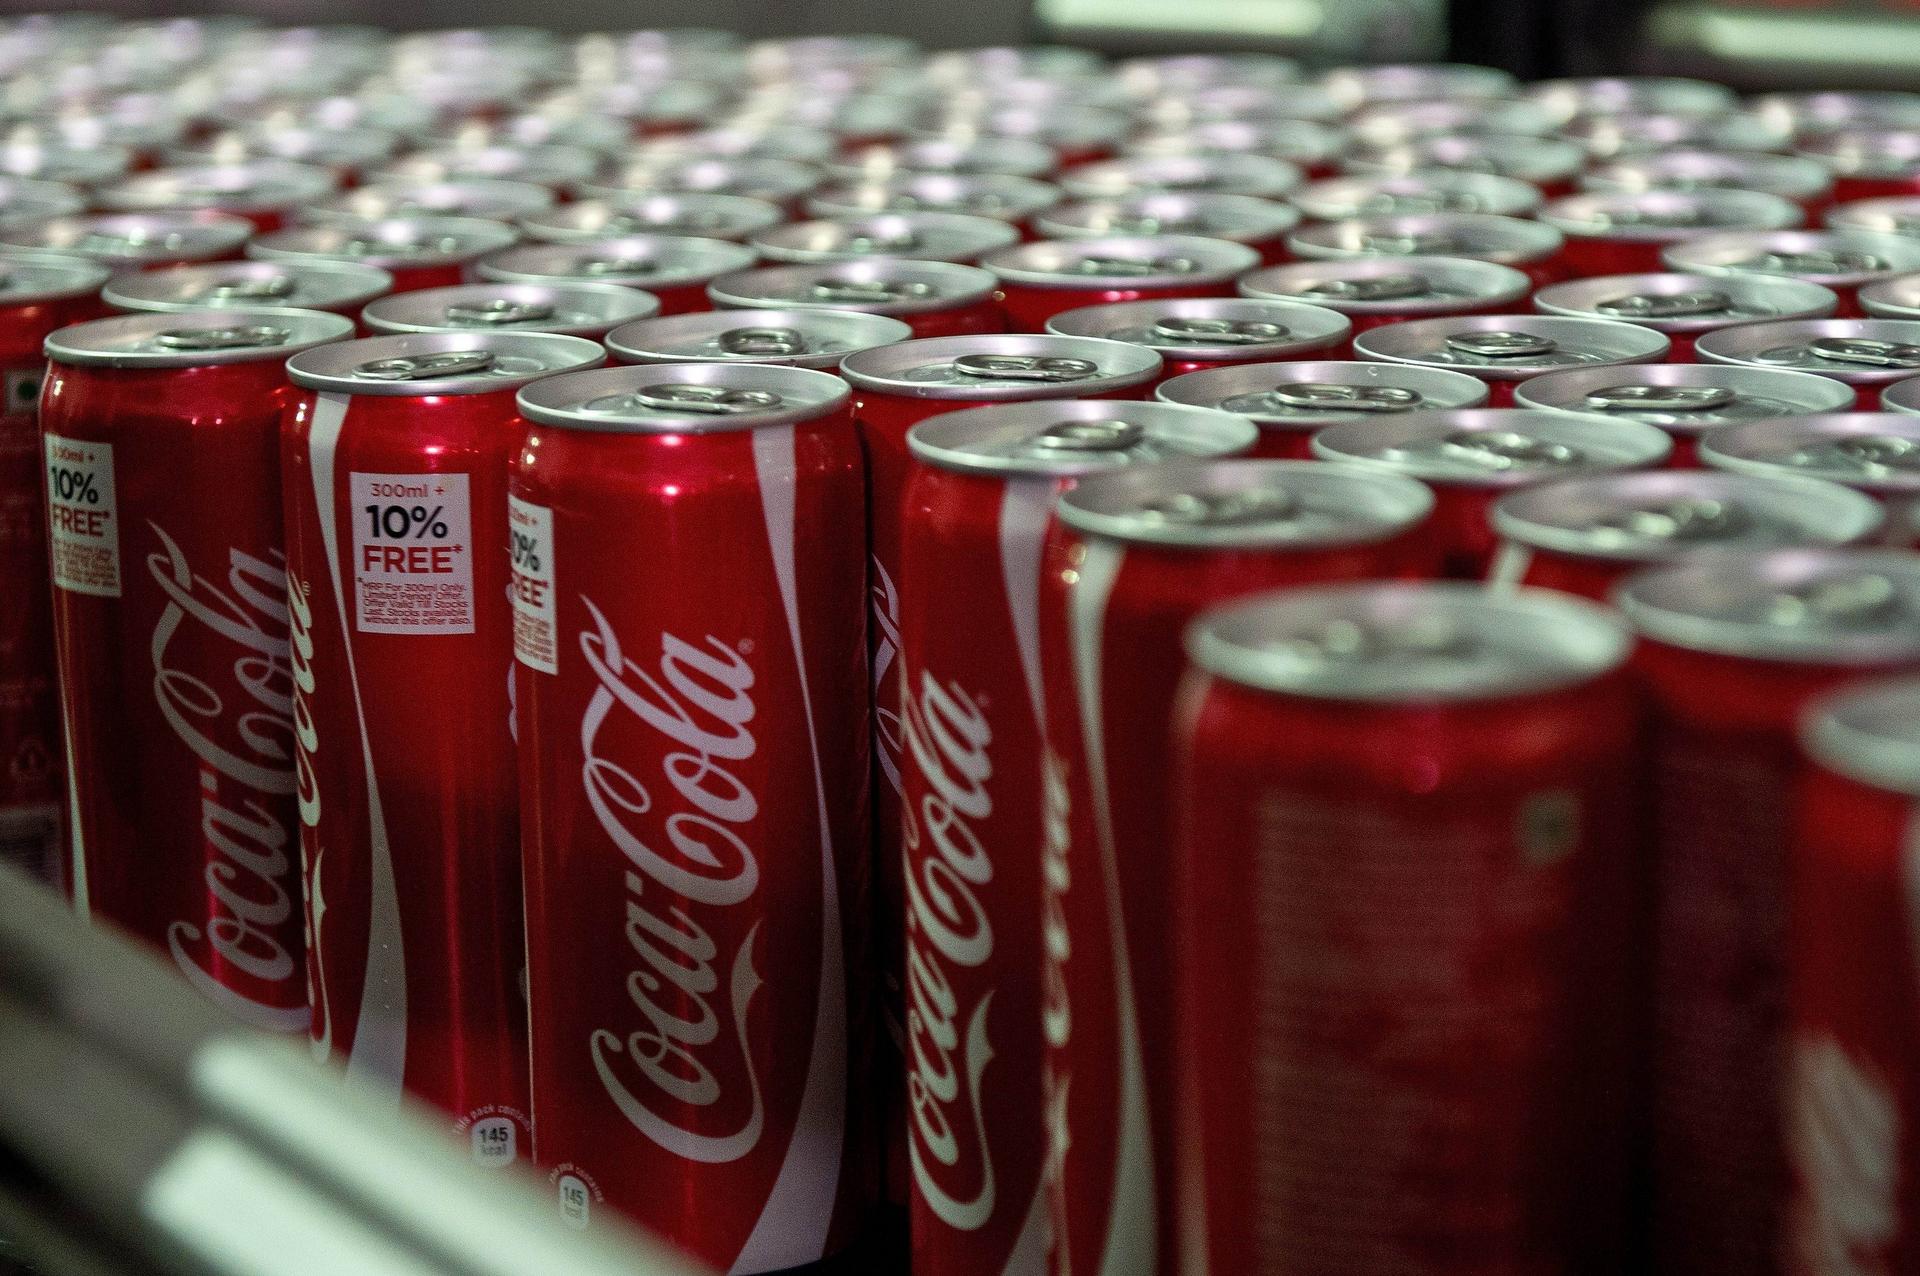 Coca-Cola has led the way in its marketing formula.